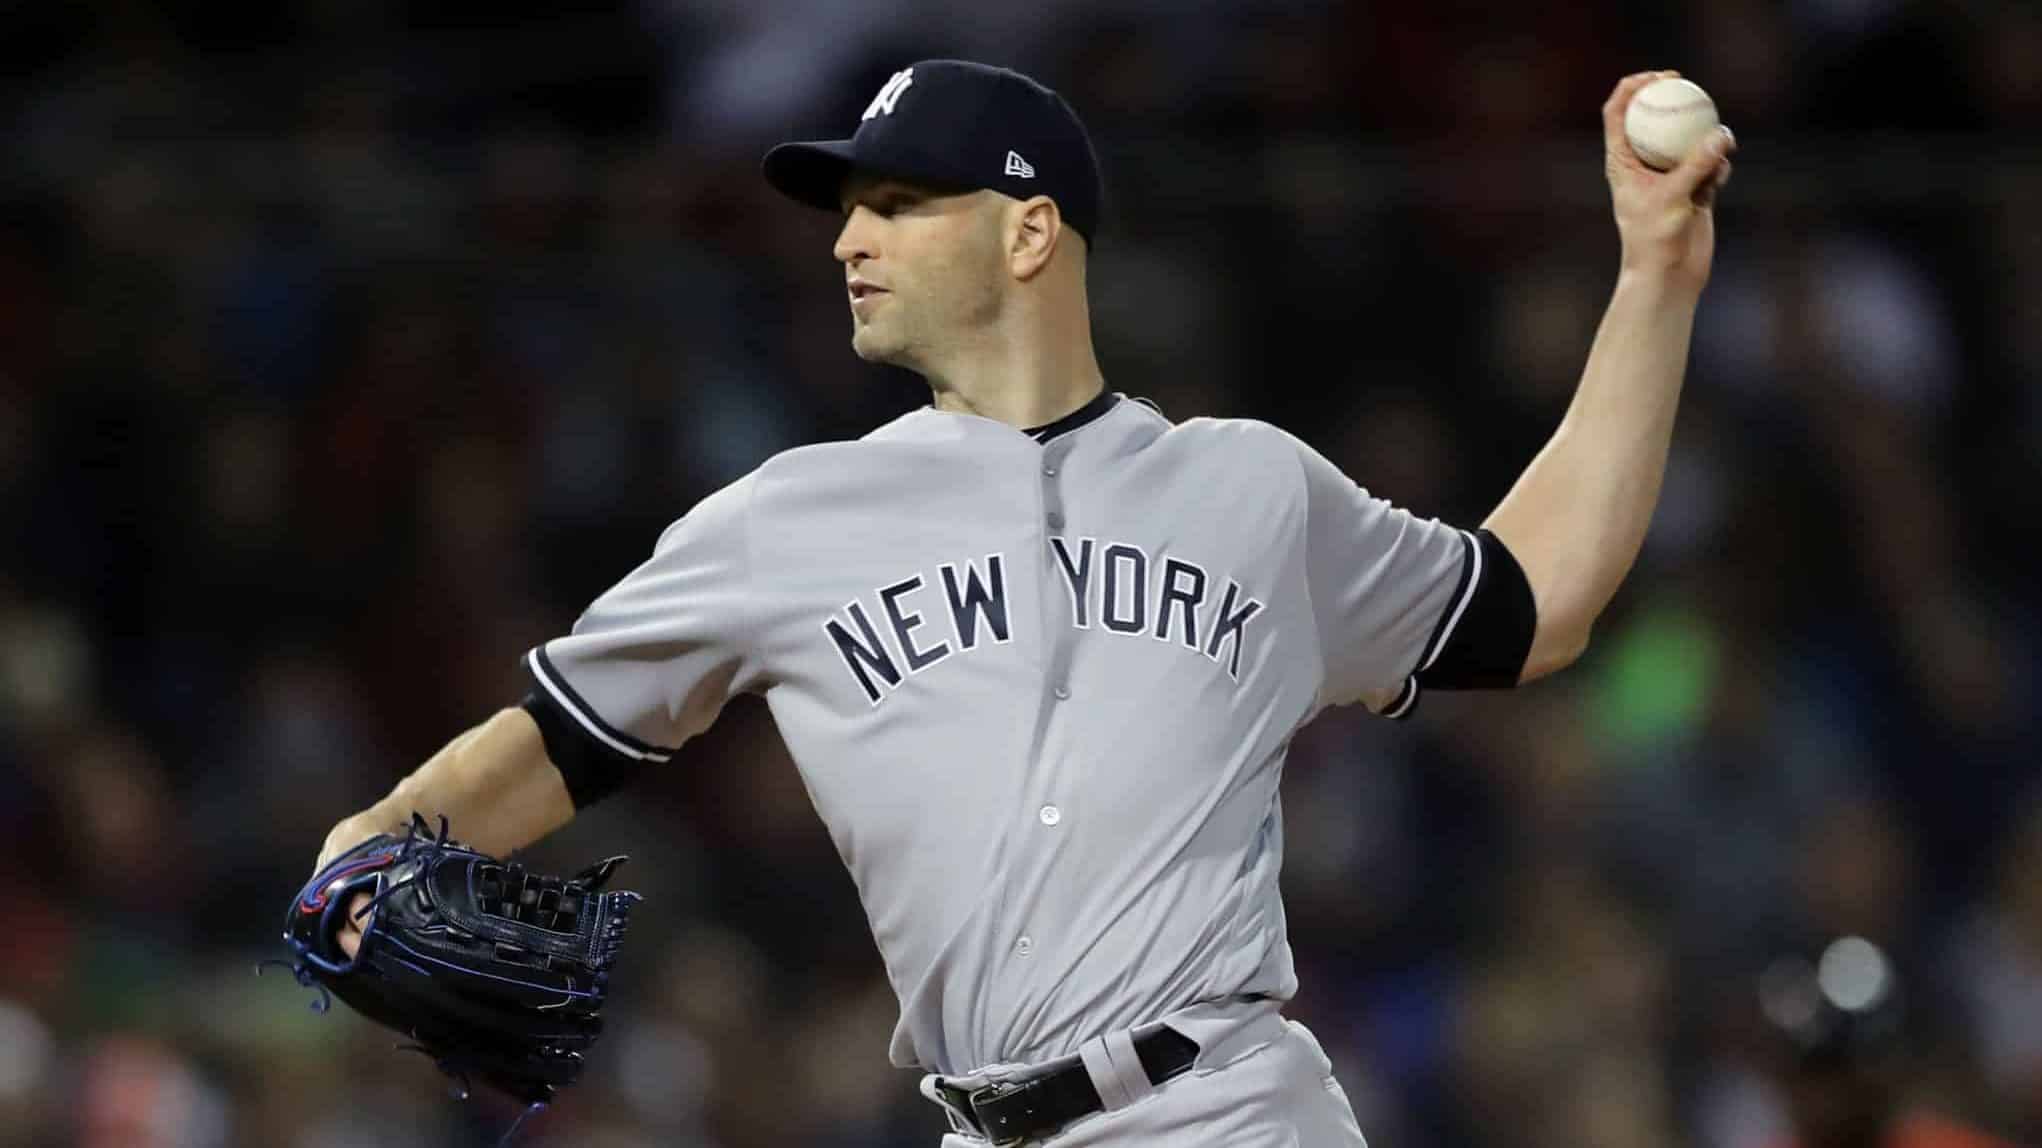 New York Yankees nearing deal with J.A. Happ